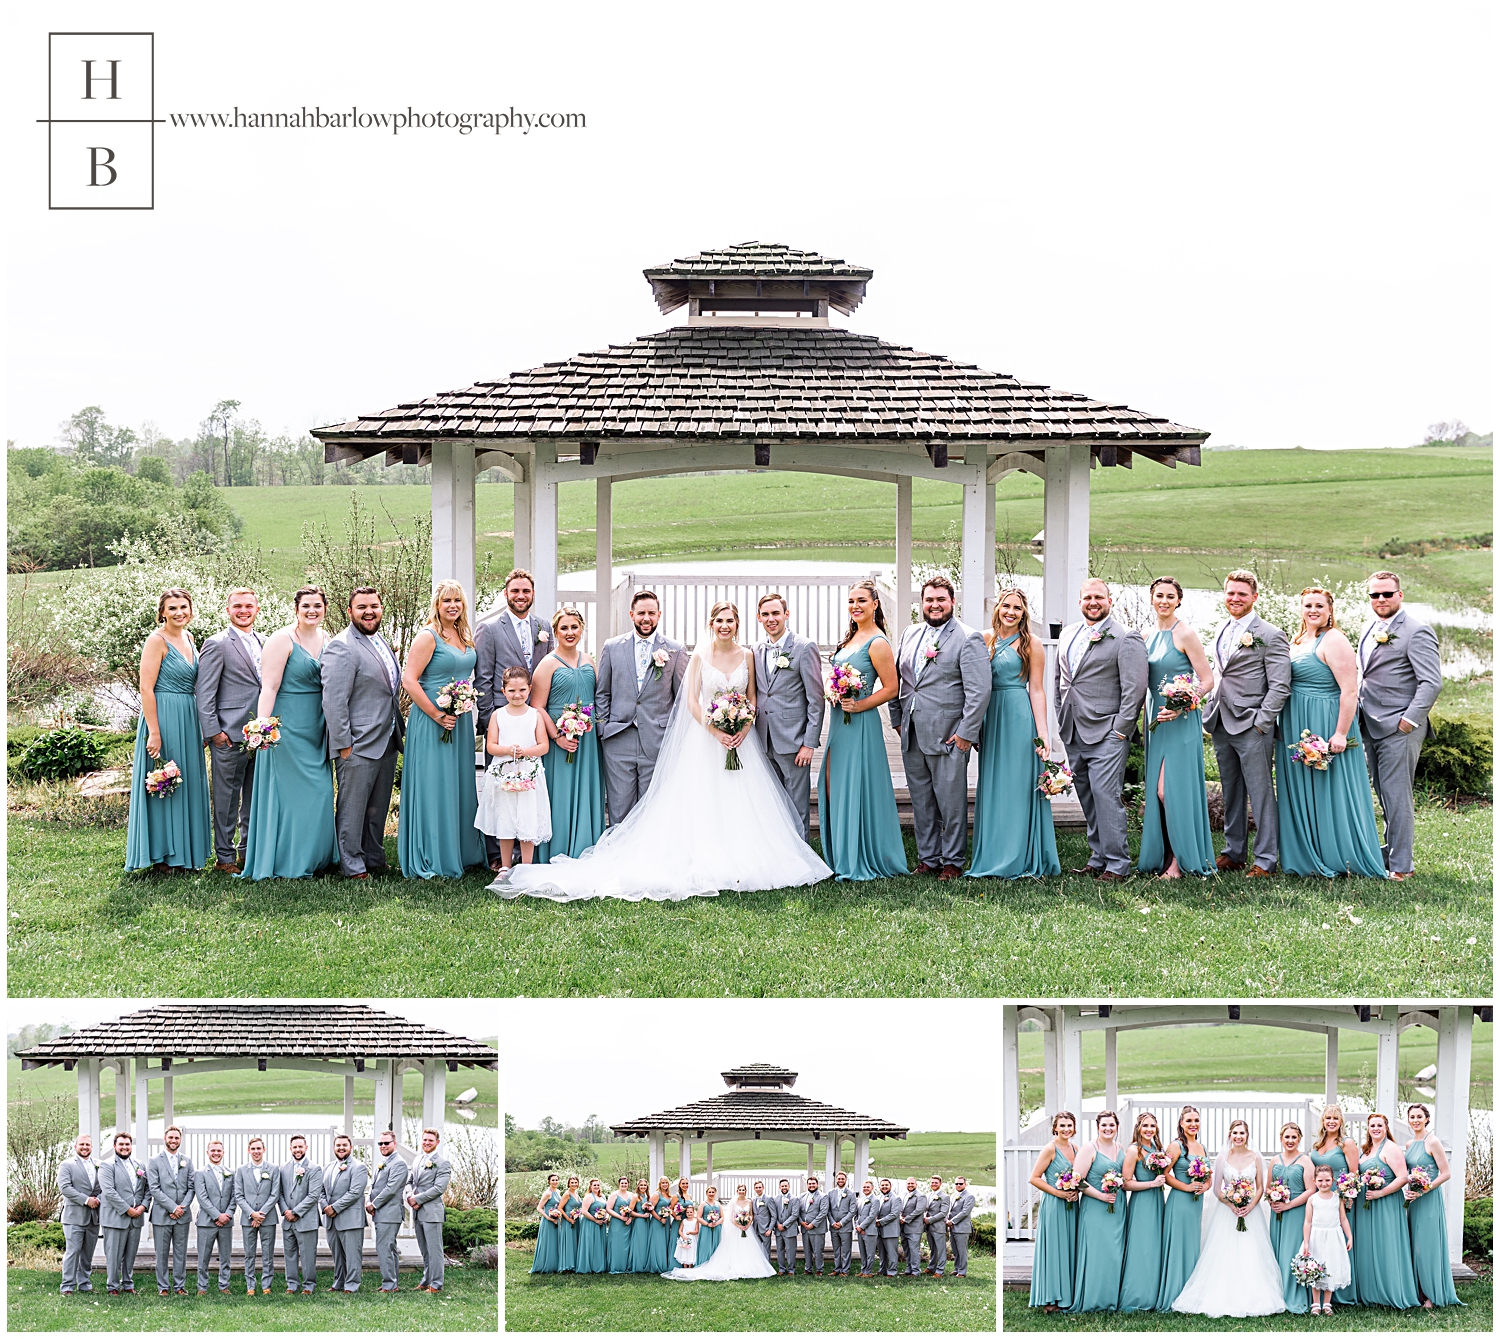 Bridal party photos featuring the men in grey tuxes and the women in deep sea blue green dresses at the White Barn in Prospect, PA.